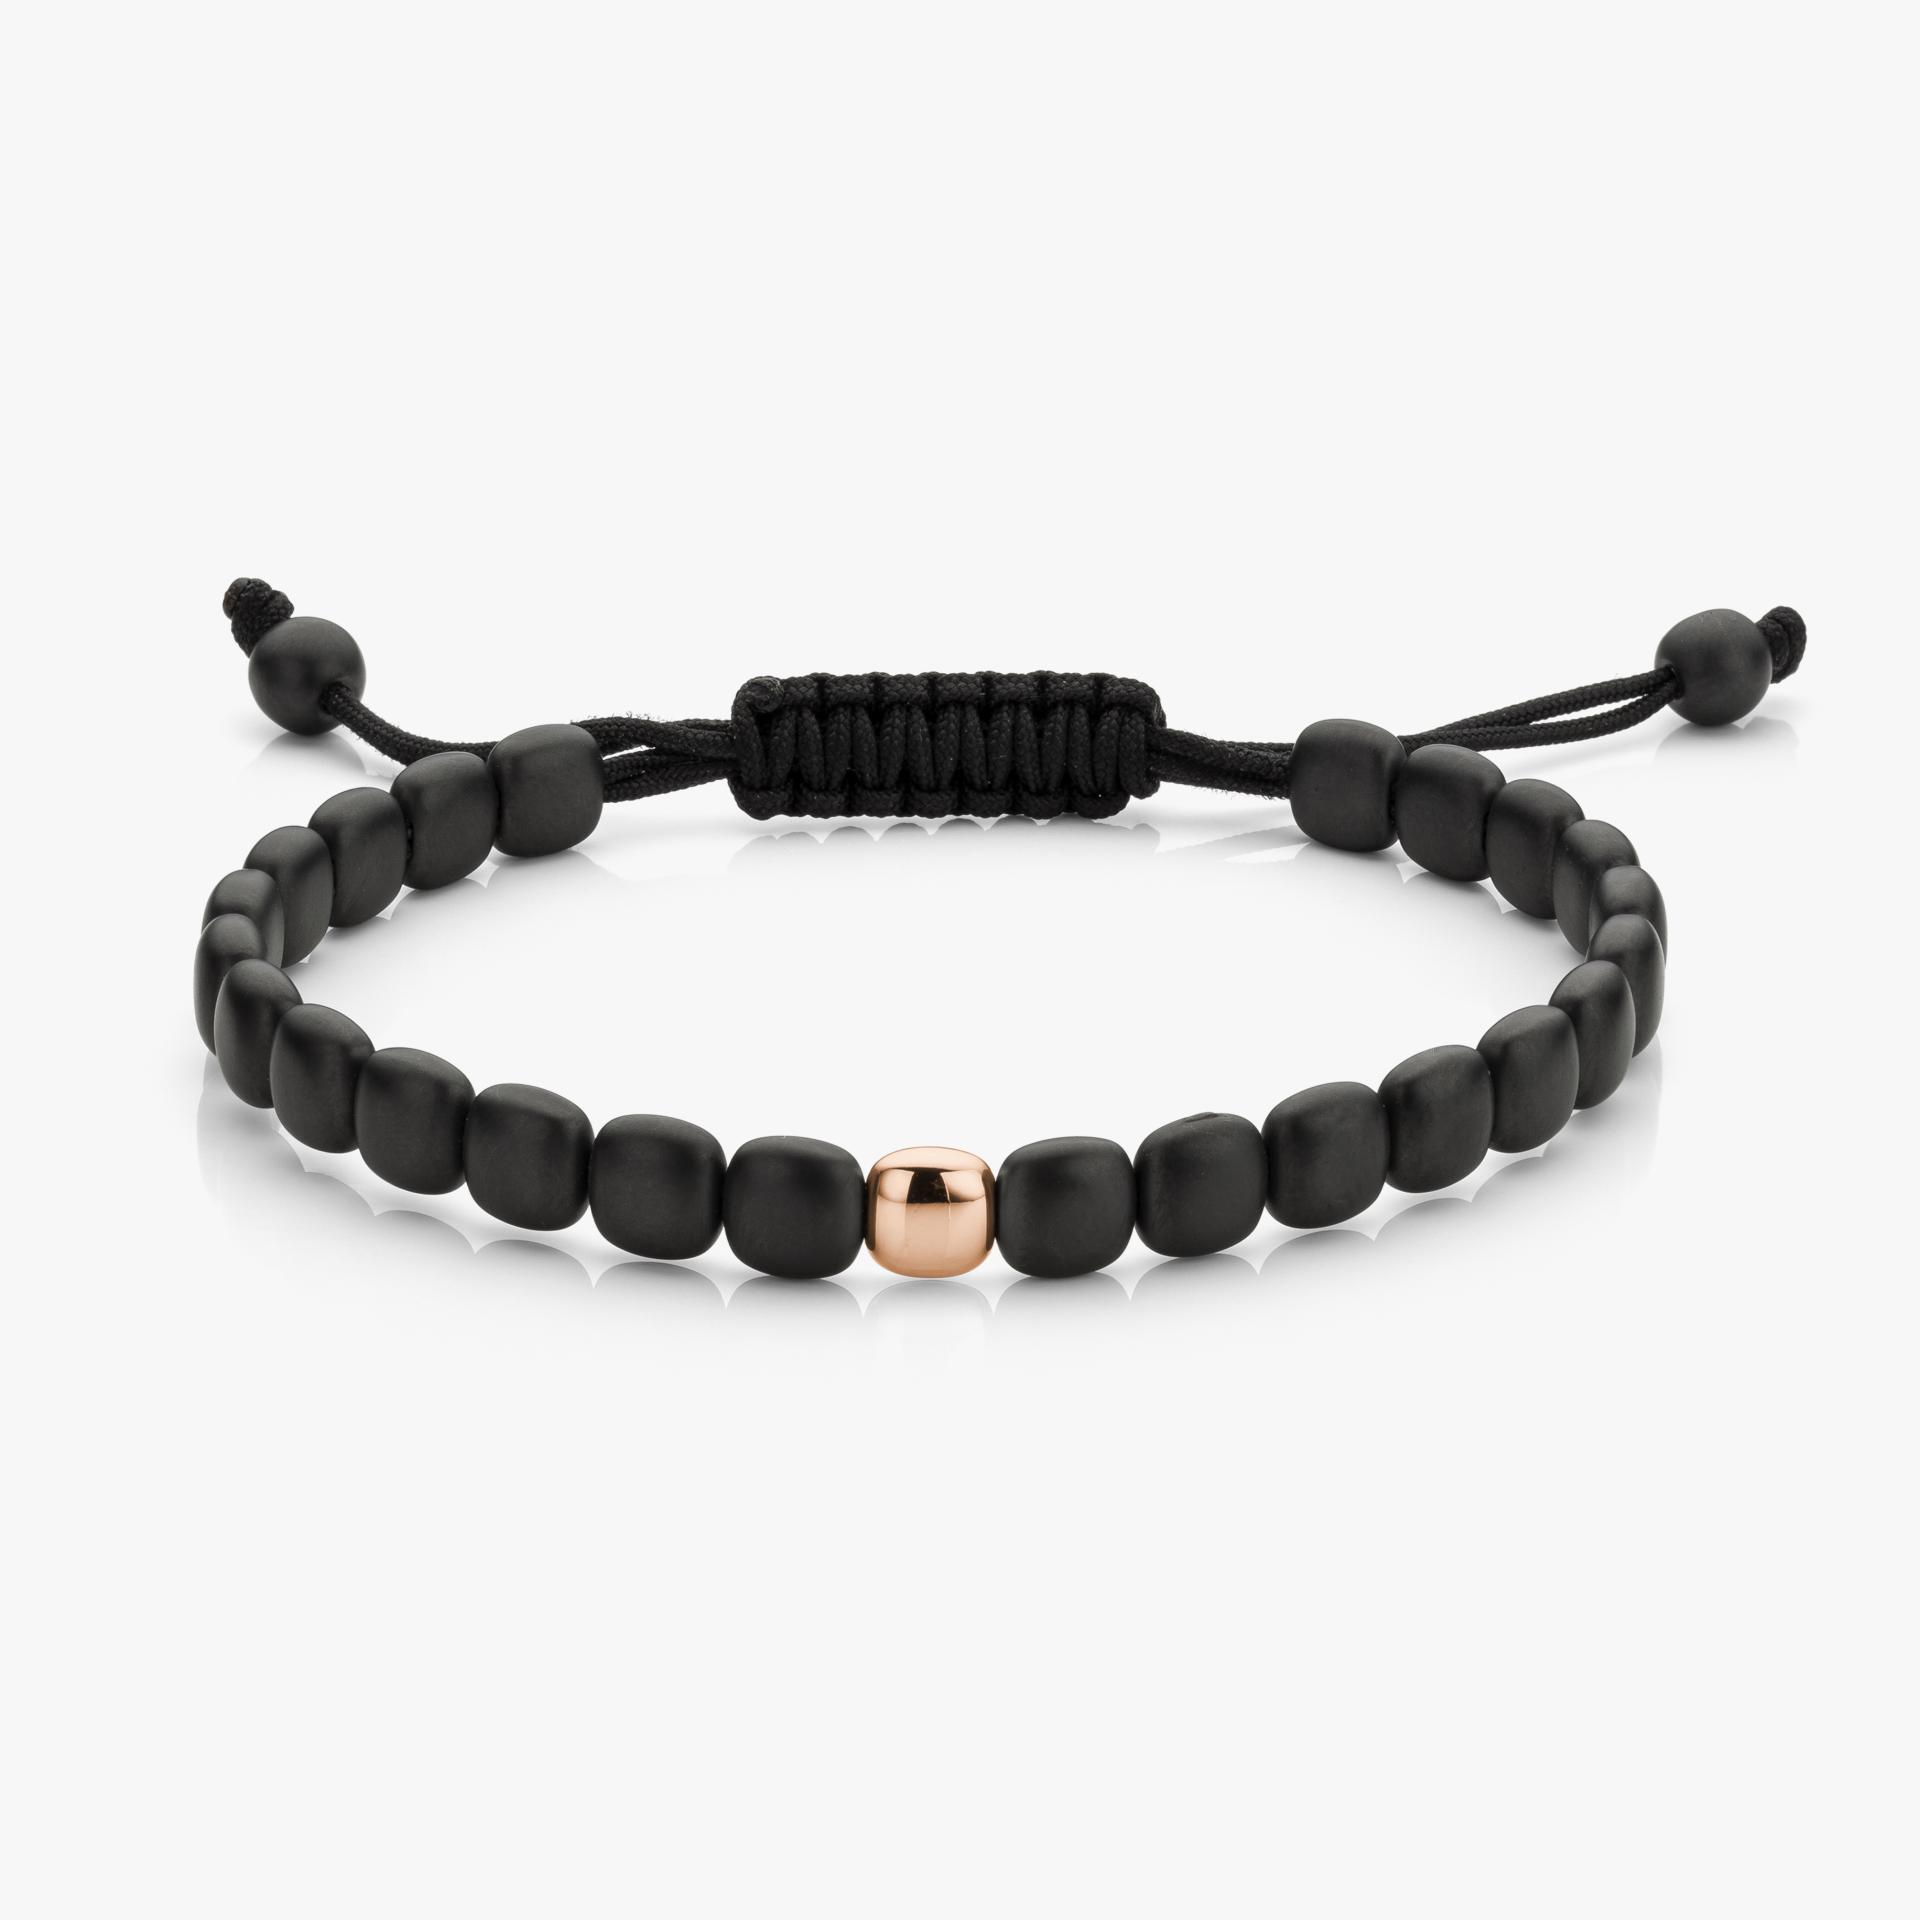 Bracelet in black ceramic and rose gold made by Maison De Greef